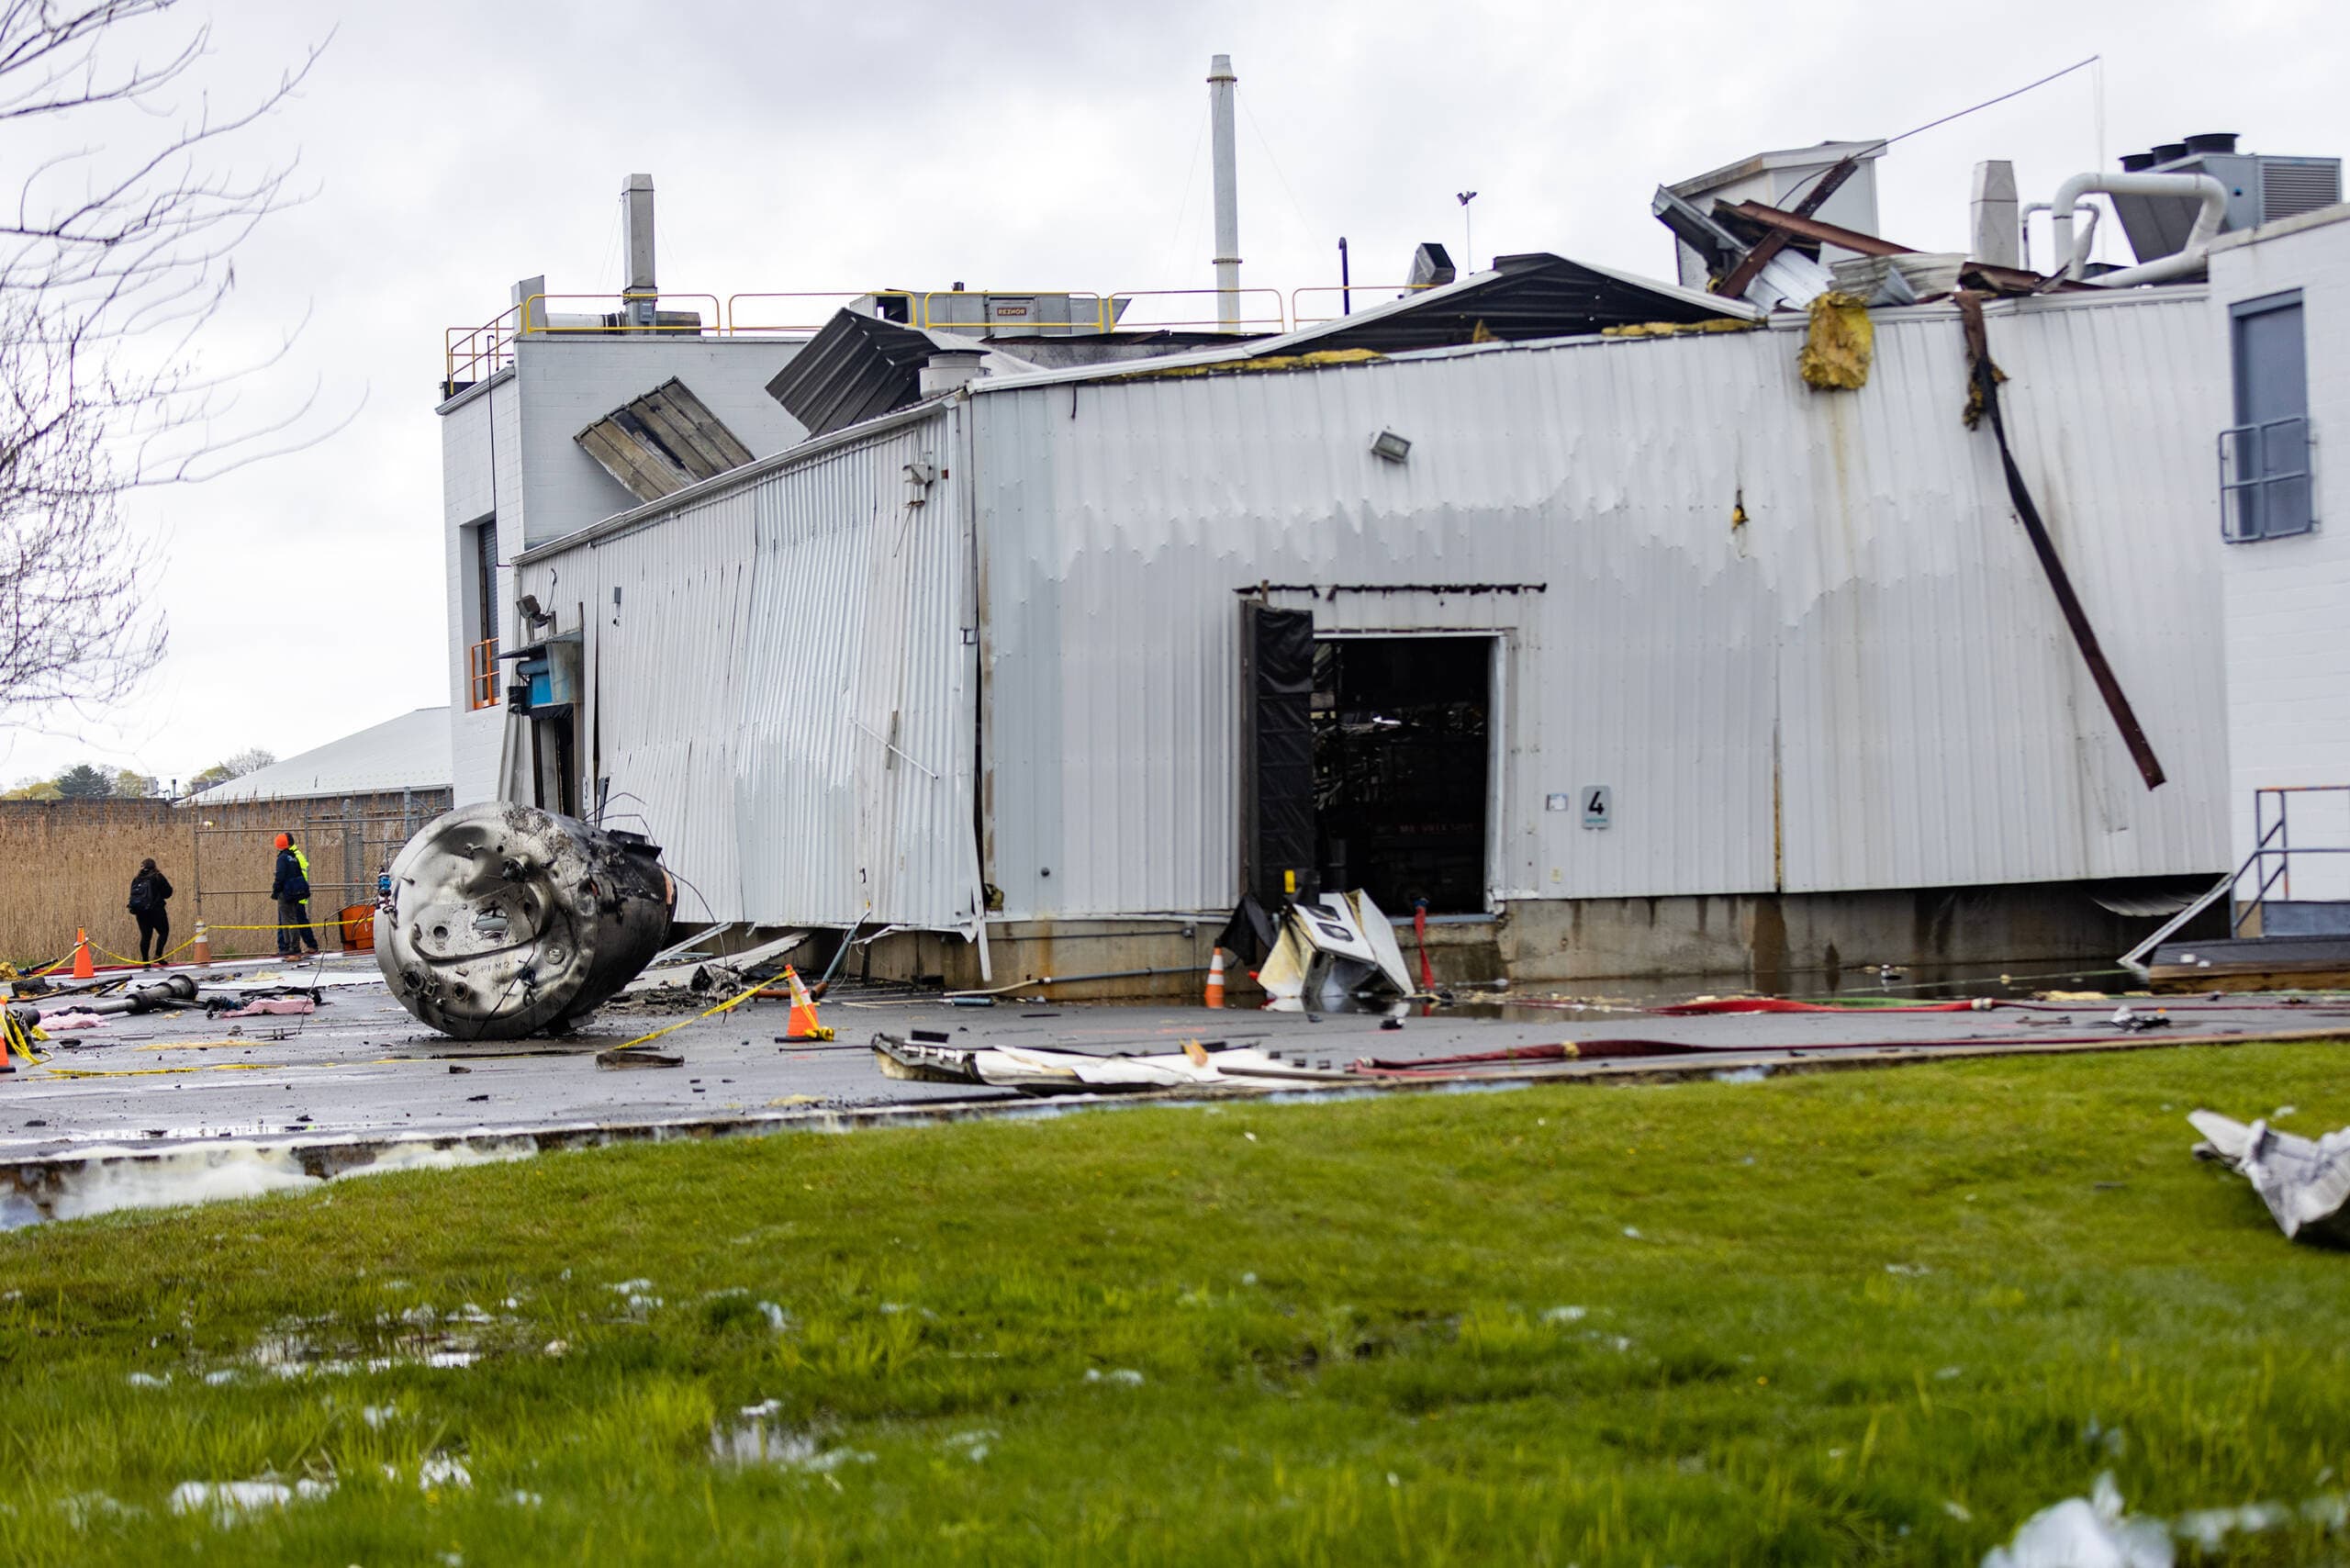 Debris scattered around the Seqens/PCI Synthesis pharmaceutical plant in Newburyport after a chemical explosion on Thursday, May 4. (Jesse Costa/WBUR)